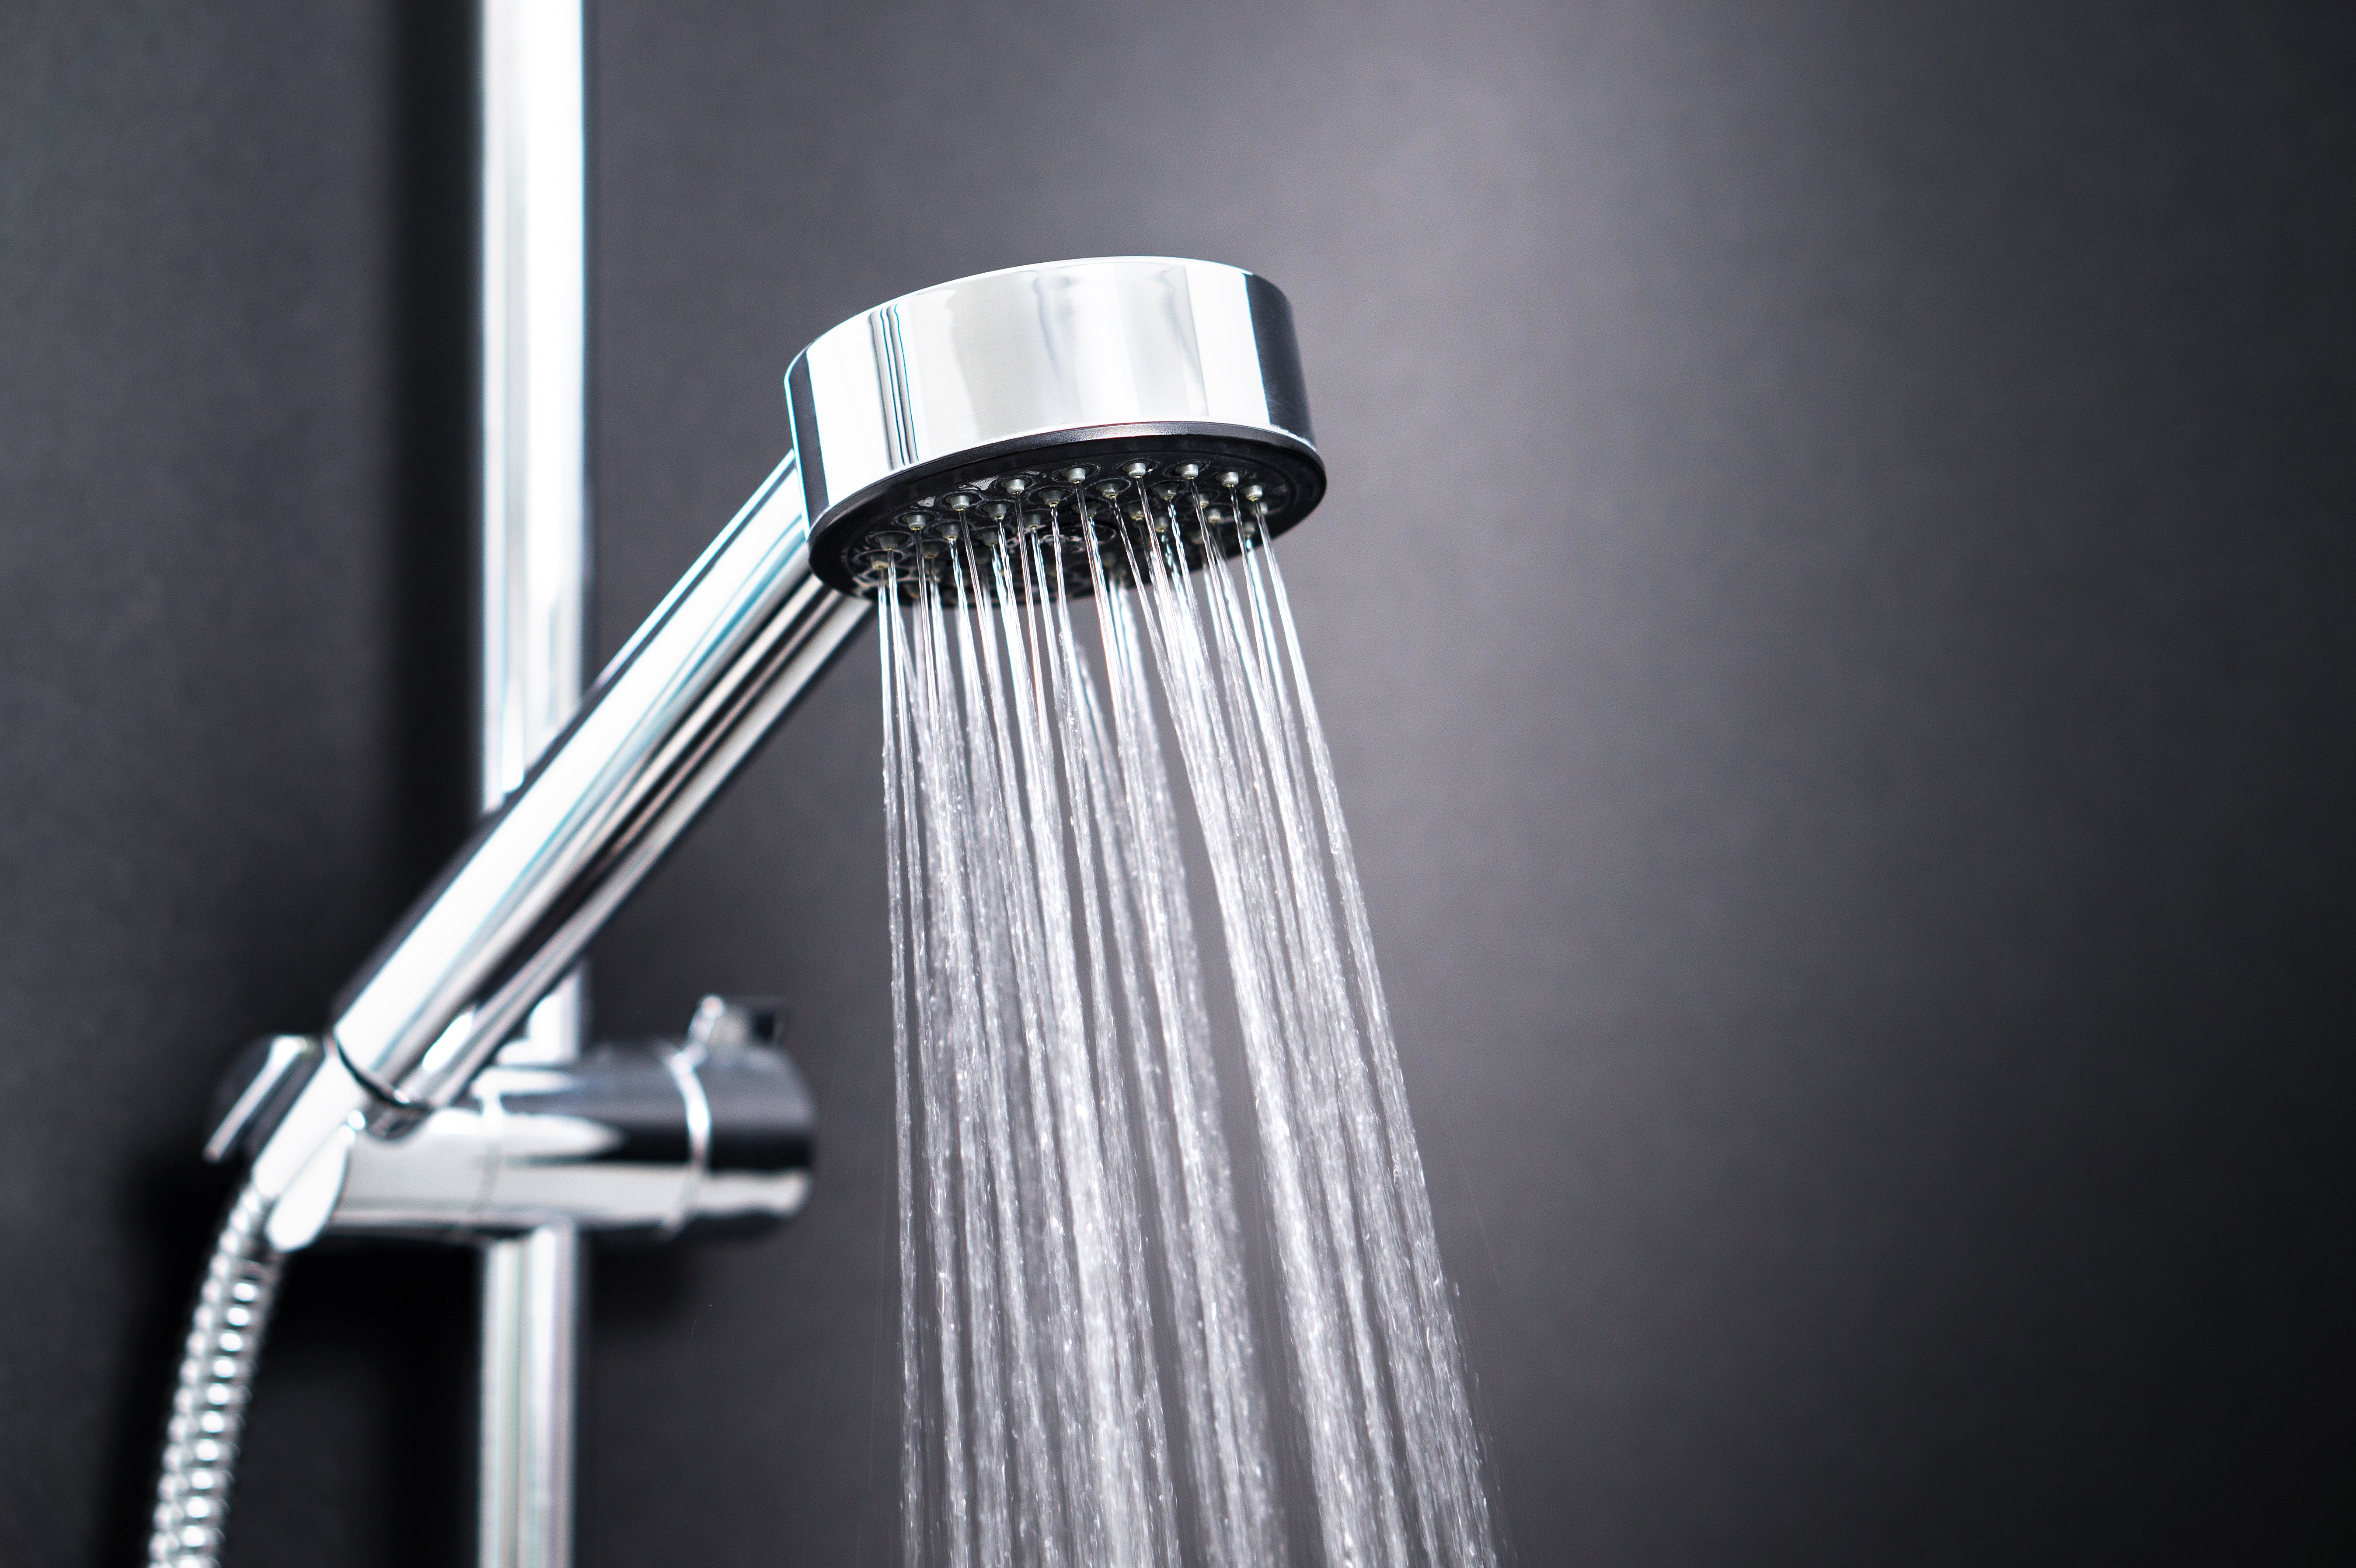 21 Reasons for Low Water Pressure in the Shower